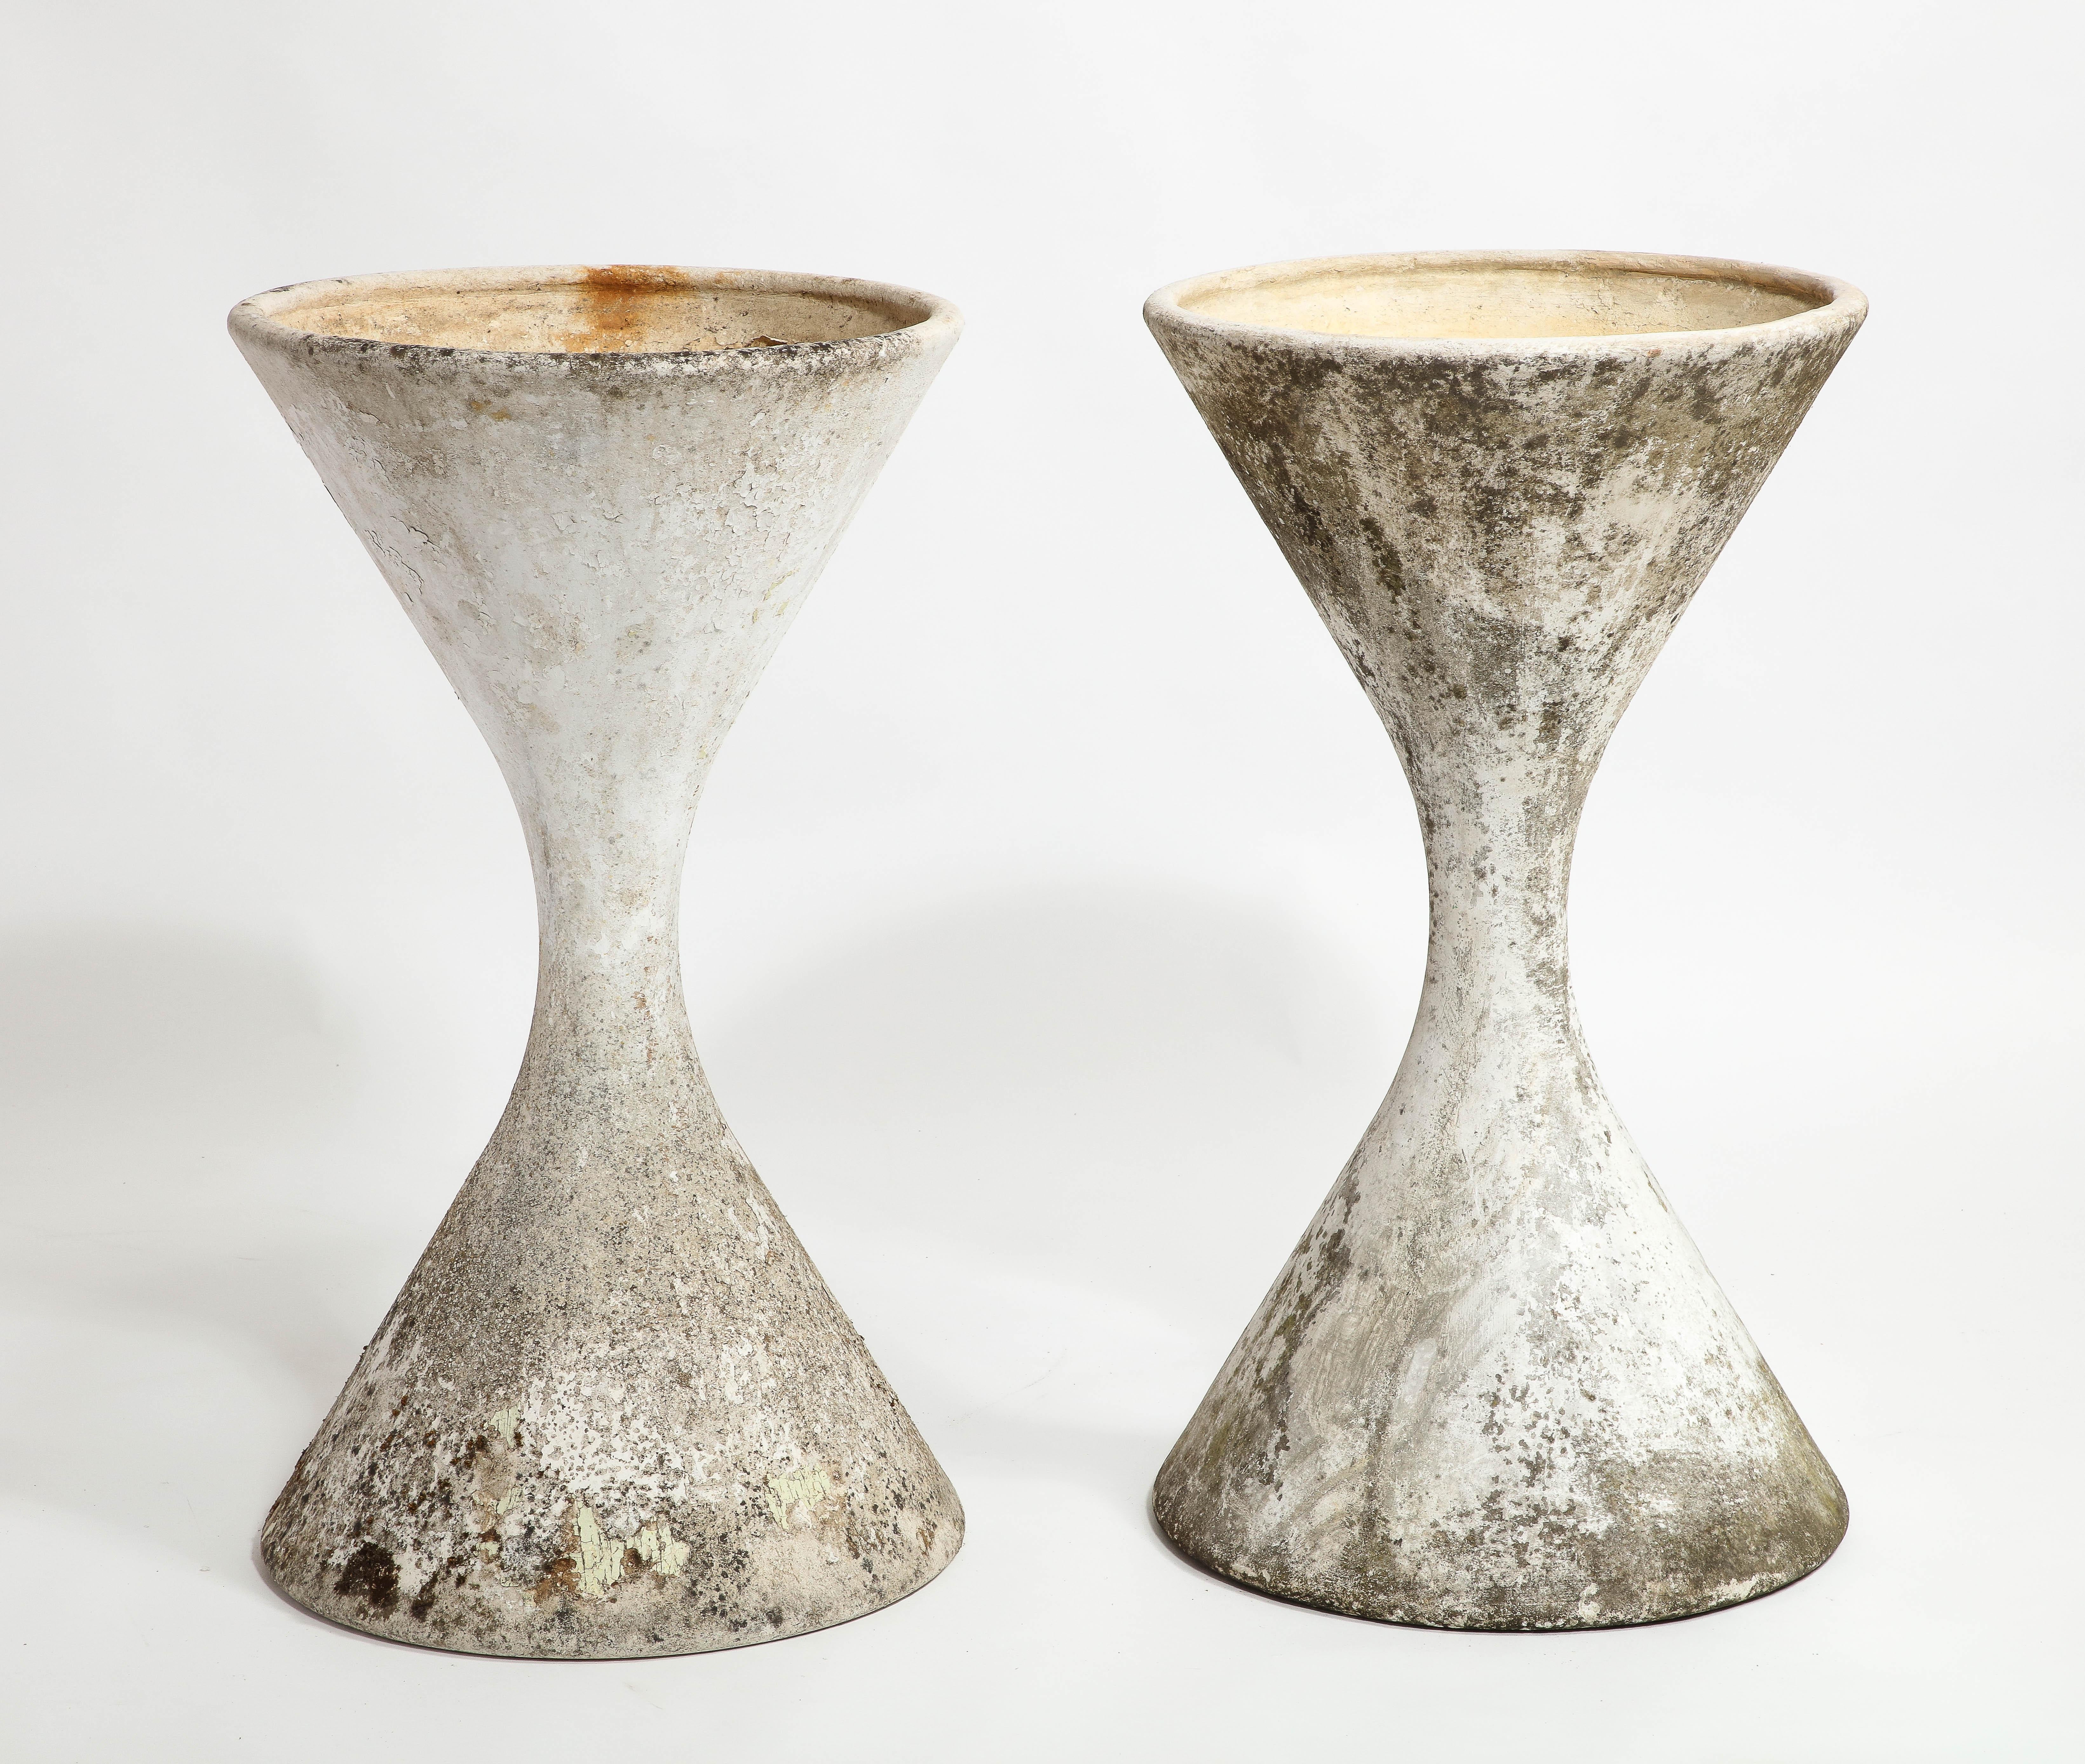 Swiss Willy Guhl for Eternit Large Concrete Diabolo Spindel Planters, 1960s For Sale